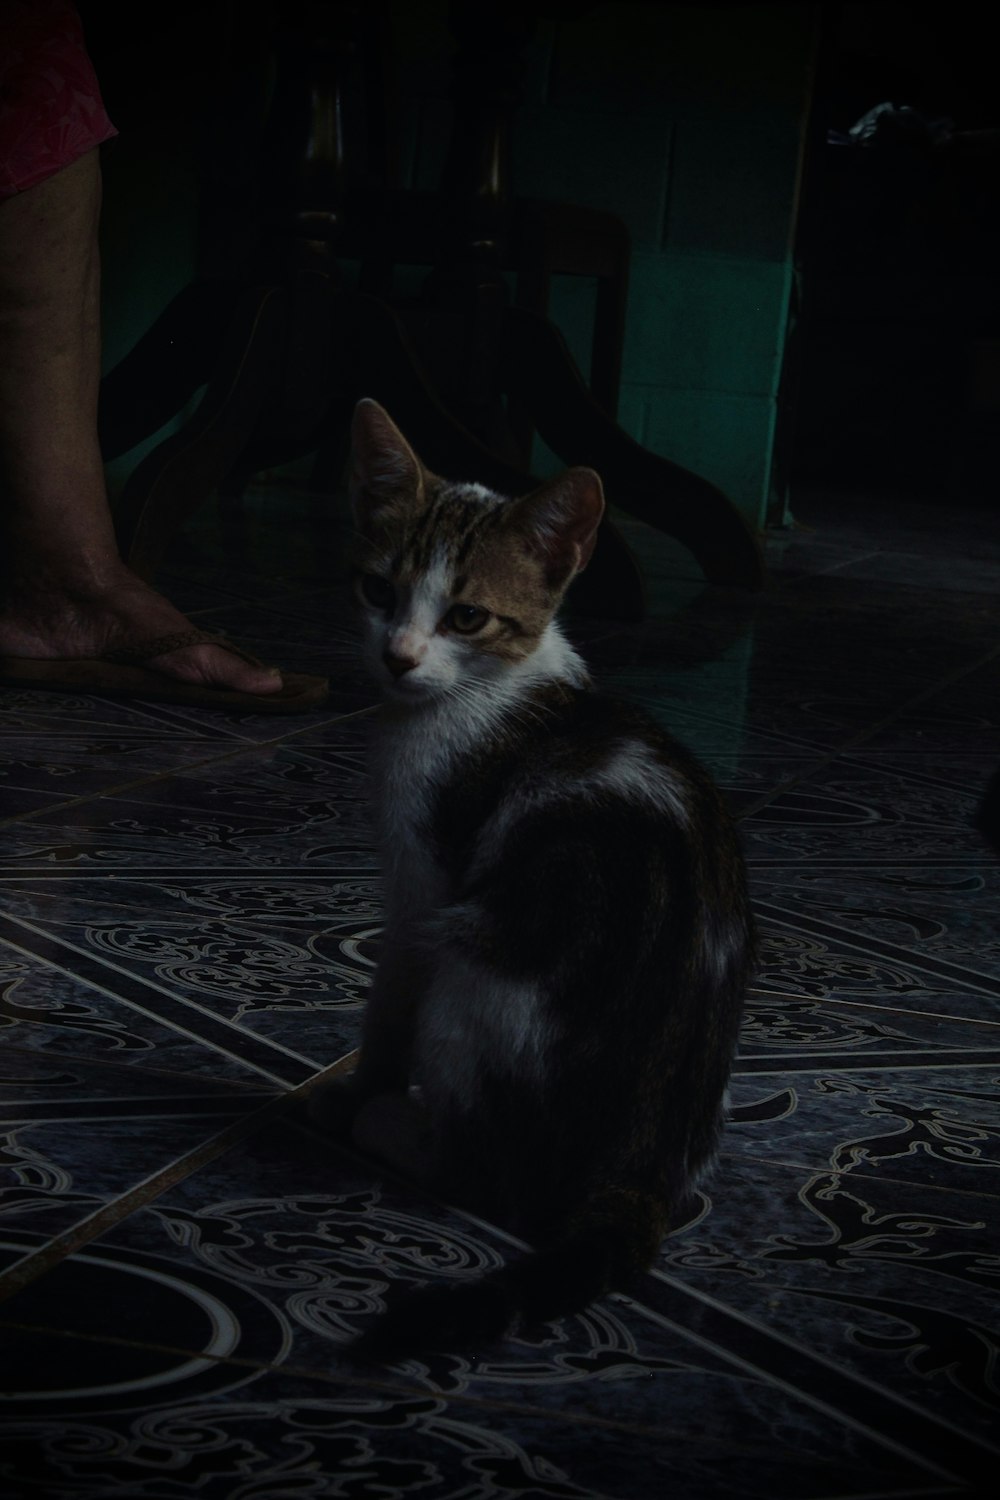 a cat sitting on the floor in the dark